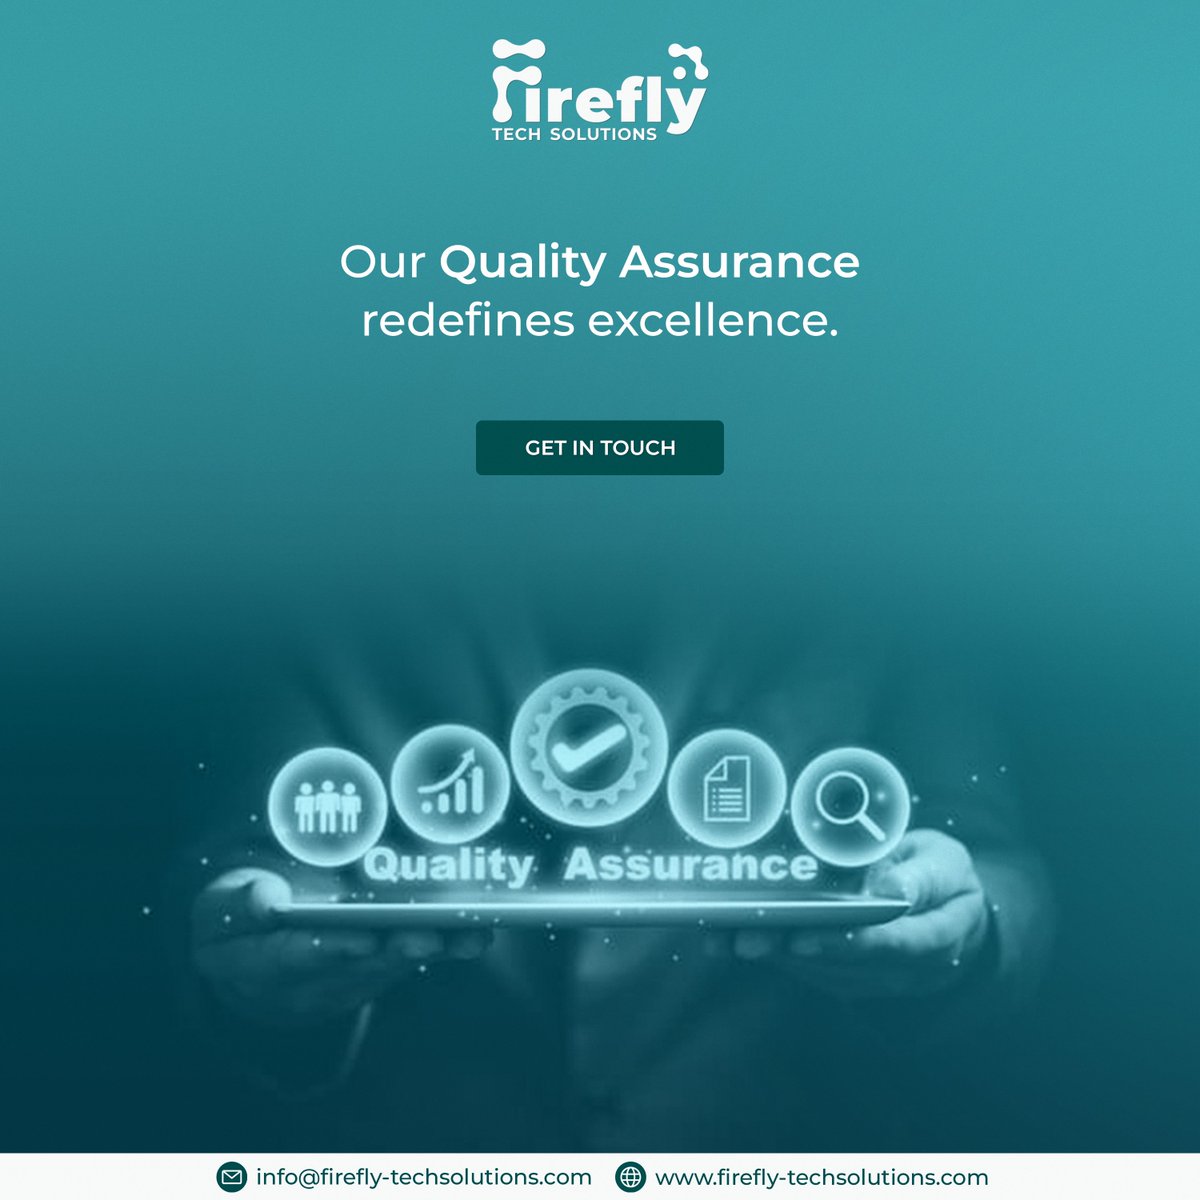 Excellence isn't a goal; it's a standard. Our Quality Assurance goes beyond testing; it redefines excellence in every aspect.
Get in touch to elevate your standards and ensure top-notch quality for your digital solutions.
#QAExcellence #QualityRedefined #TechSolutions #Firefly